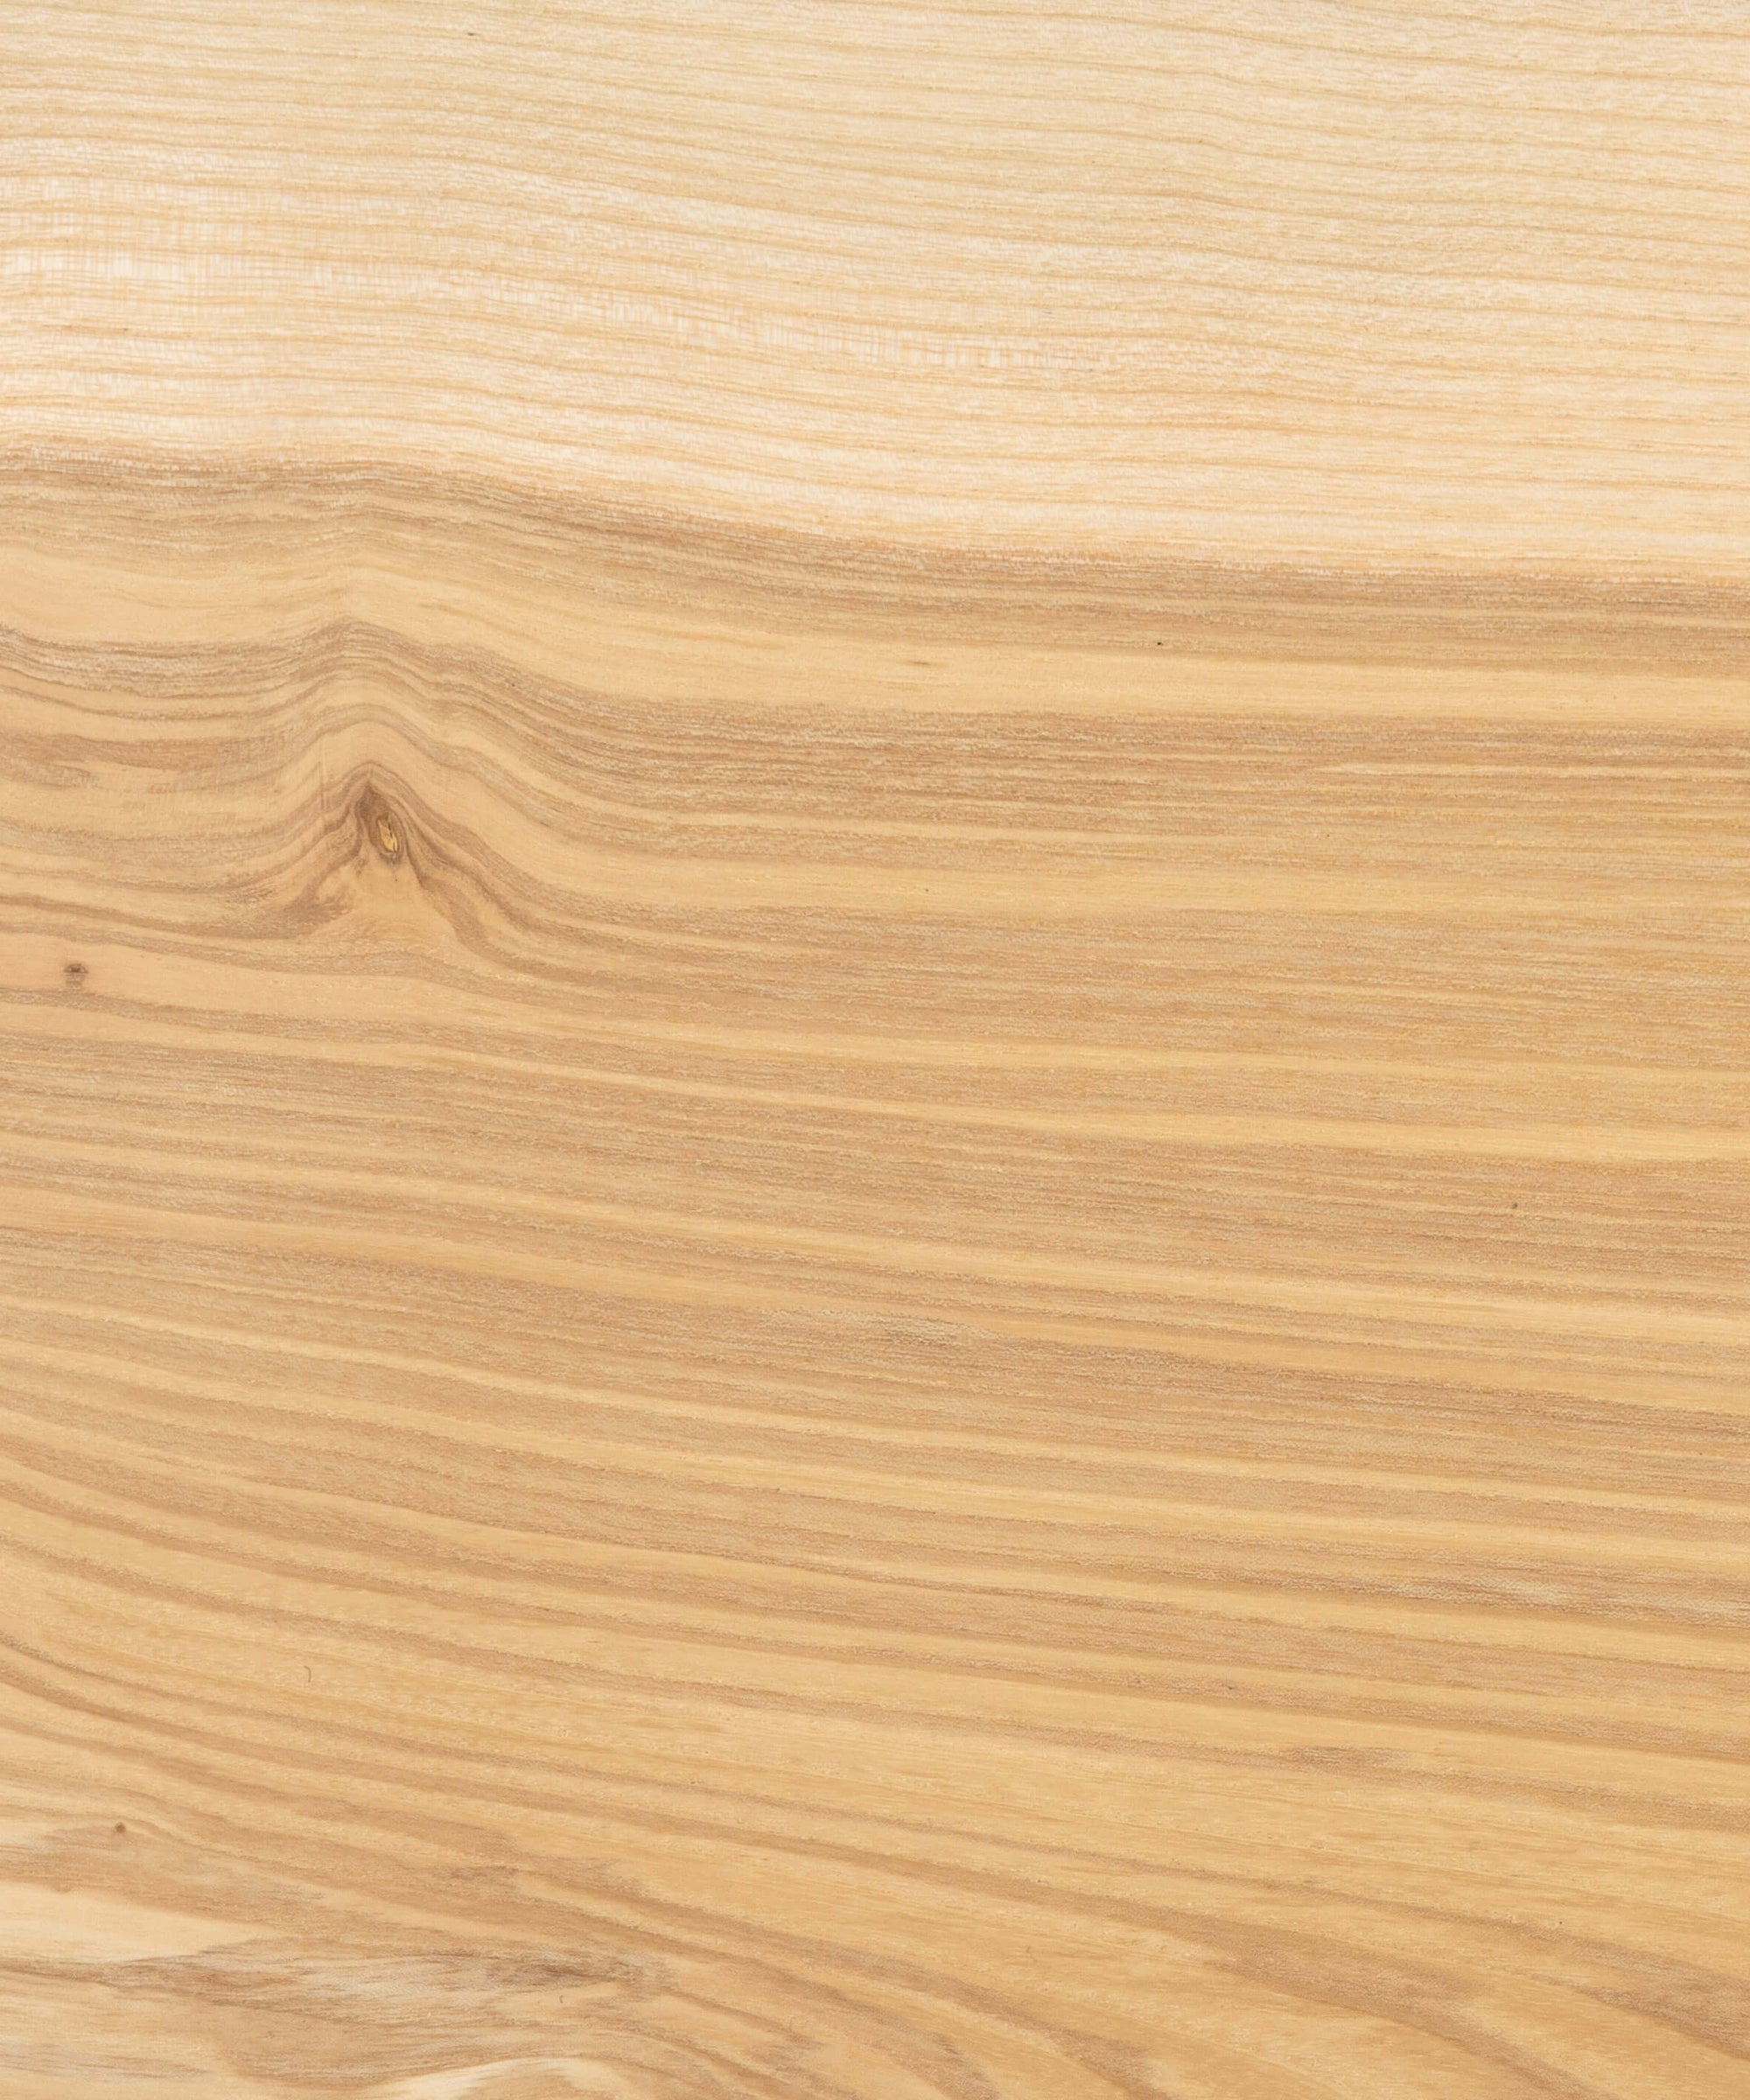 oiled olive ash timber grain close up